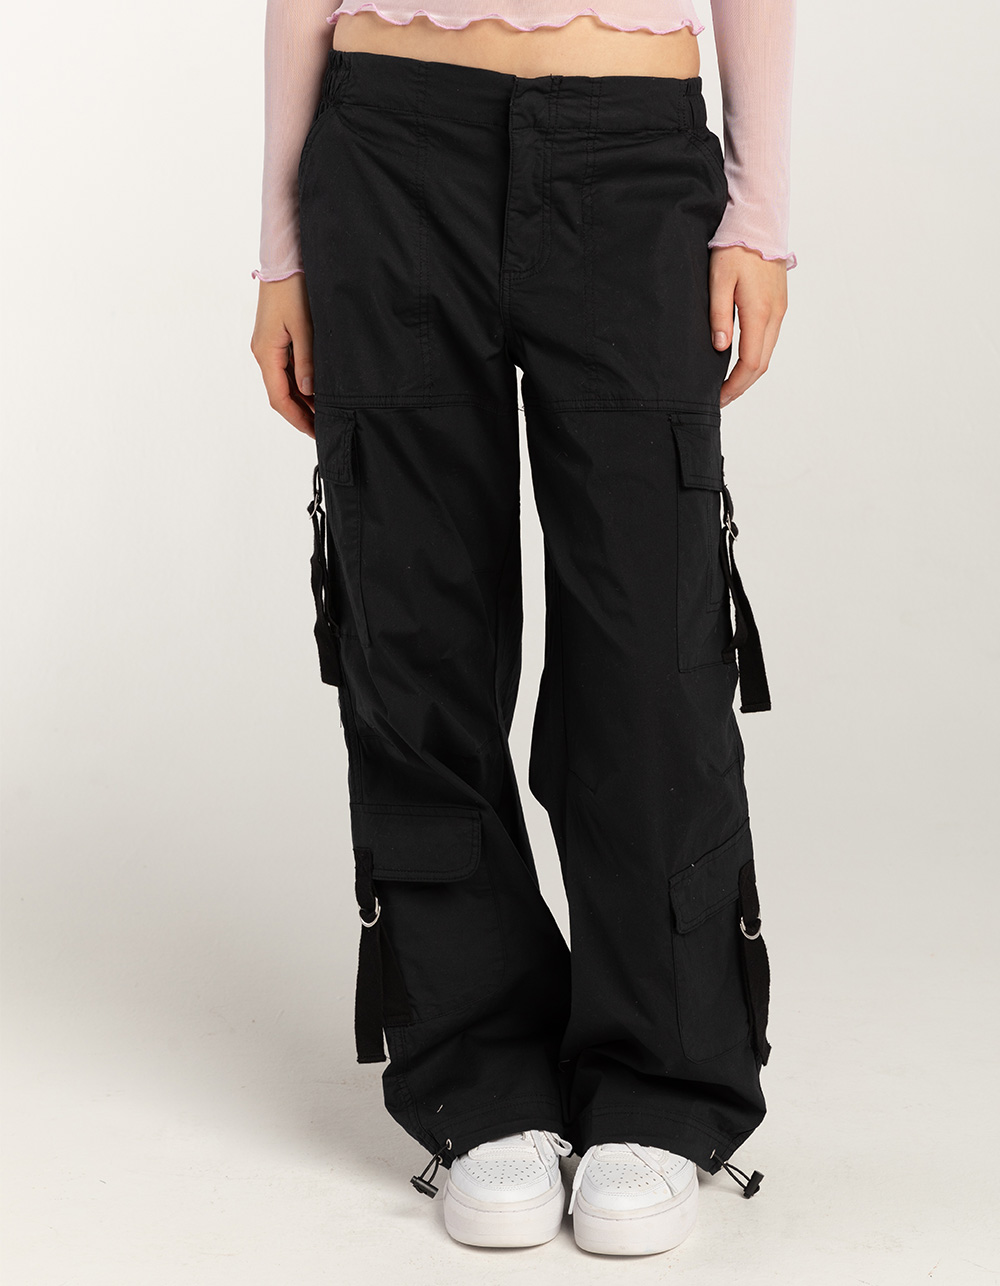 Women's High-Rise Cargo Parachute Pants - All In Motion™ Black L 1 ct